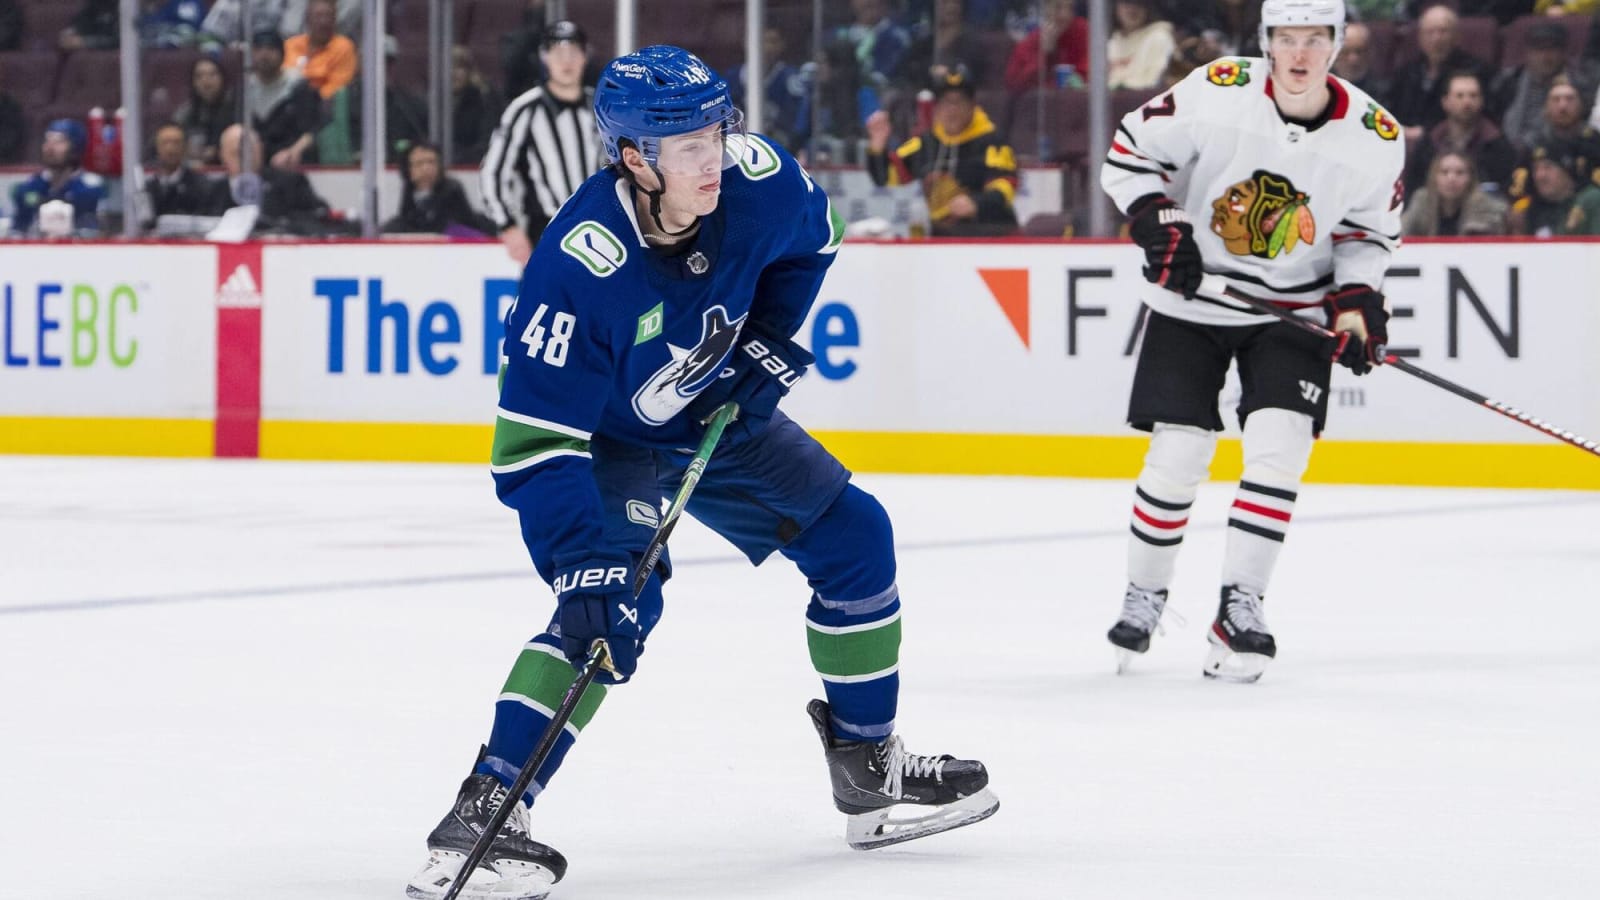 Cole McWard on the Canucks’ roster makes some sense, but only as a short-term measure